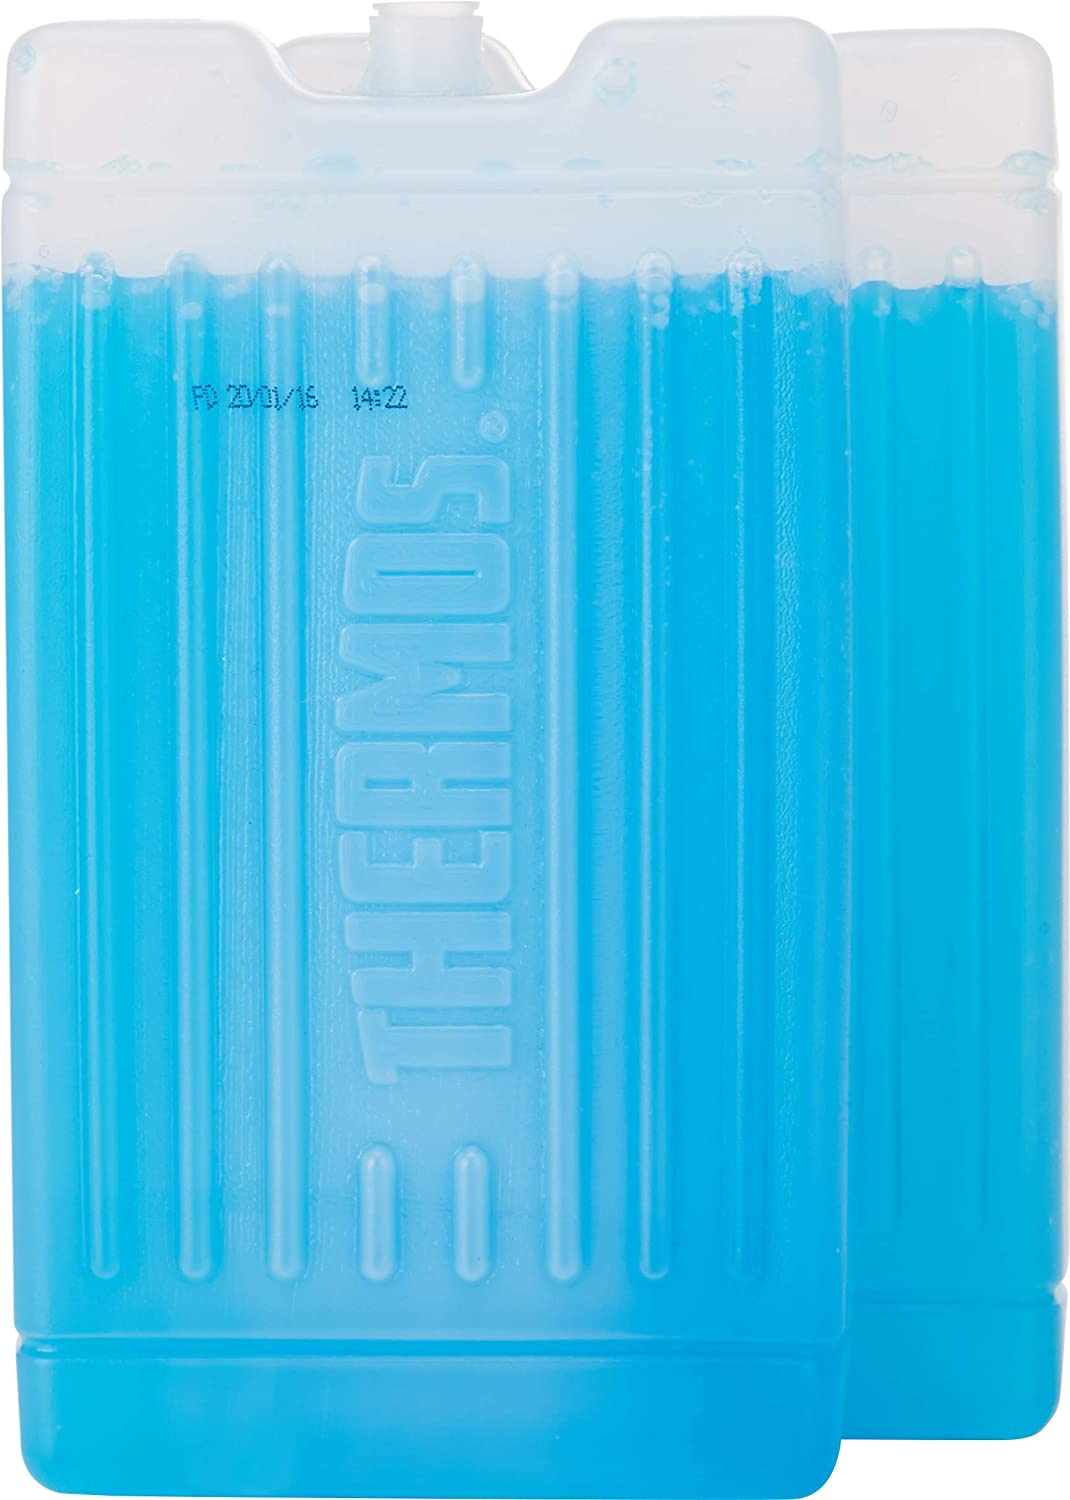 Thermos-Weekend-Reusable-Ice-Packs-400g-Blue-Pack-of-2